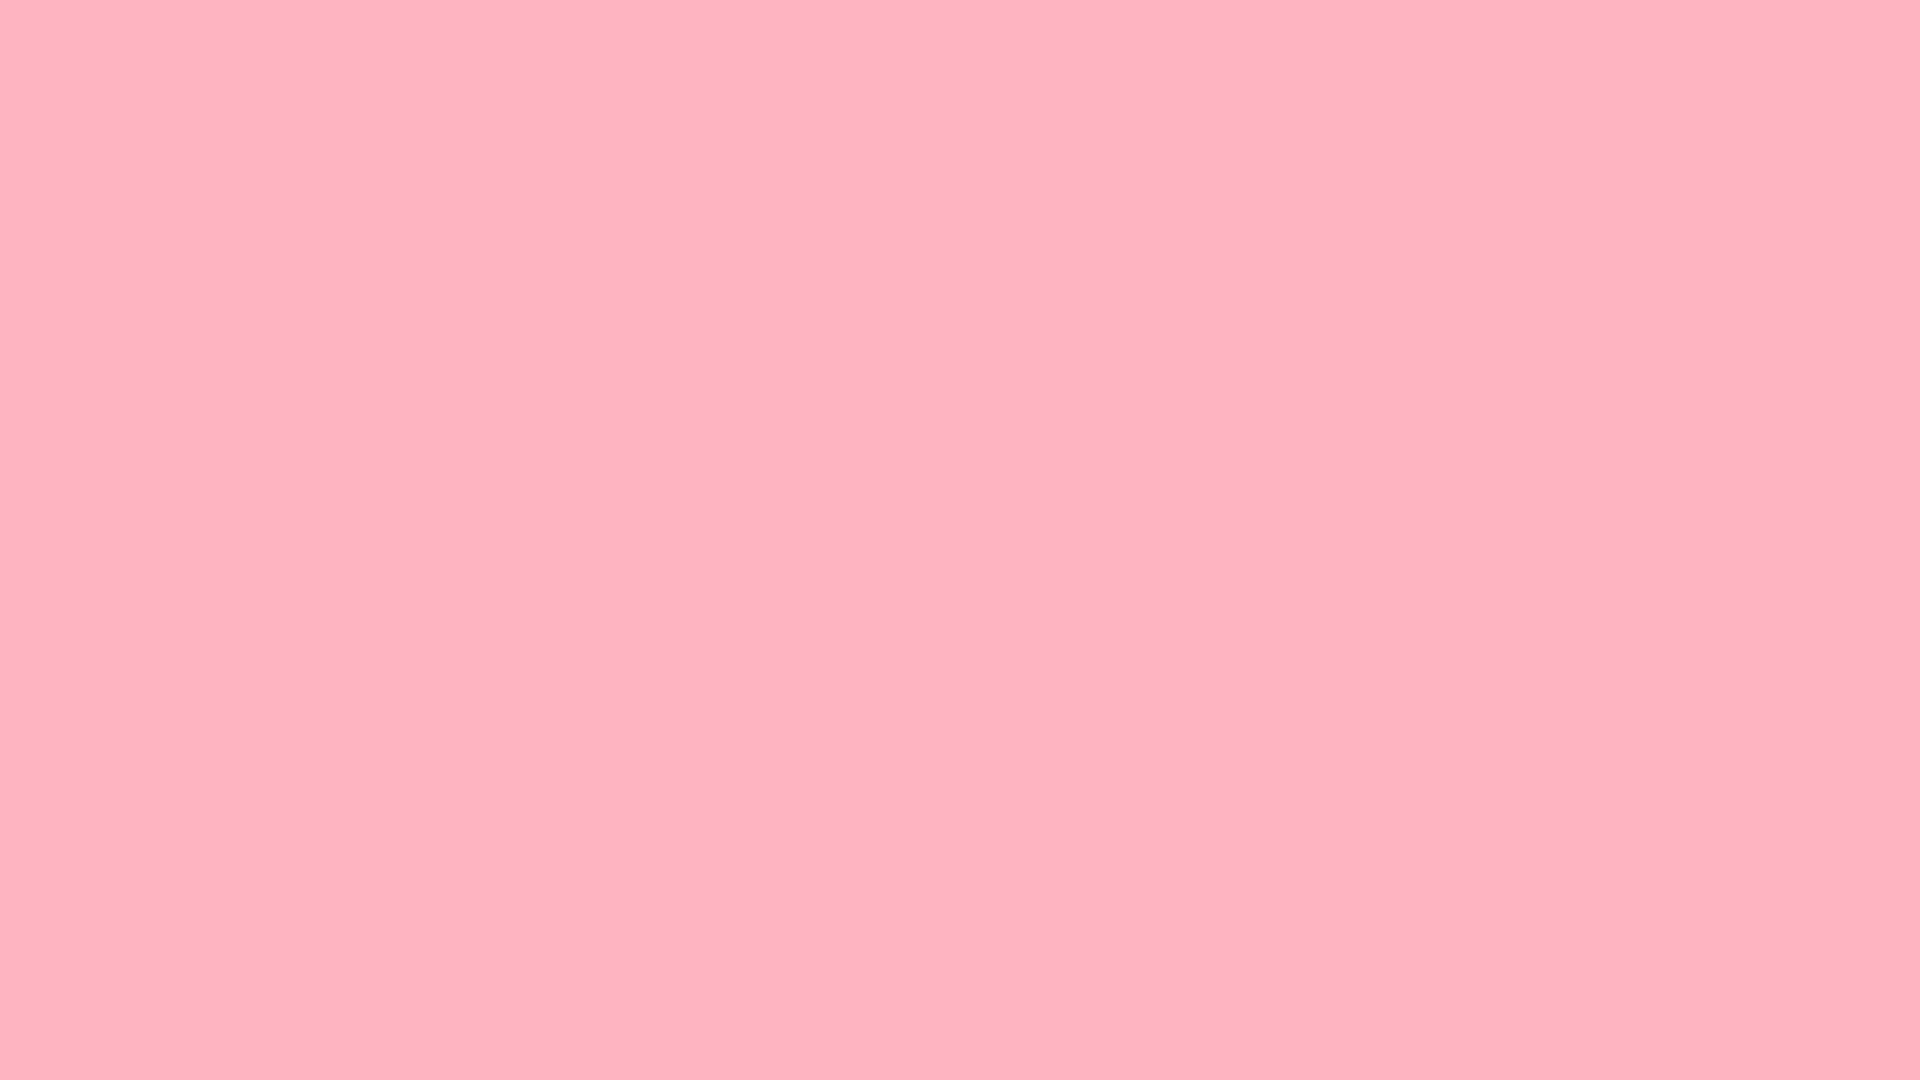 Free Pink Solid Color Wallpaper Downloads, [100+] Pink Solid Color  Wallpapers for FREE 